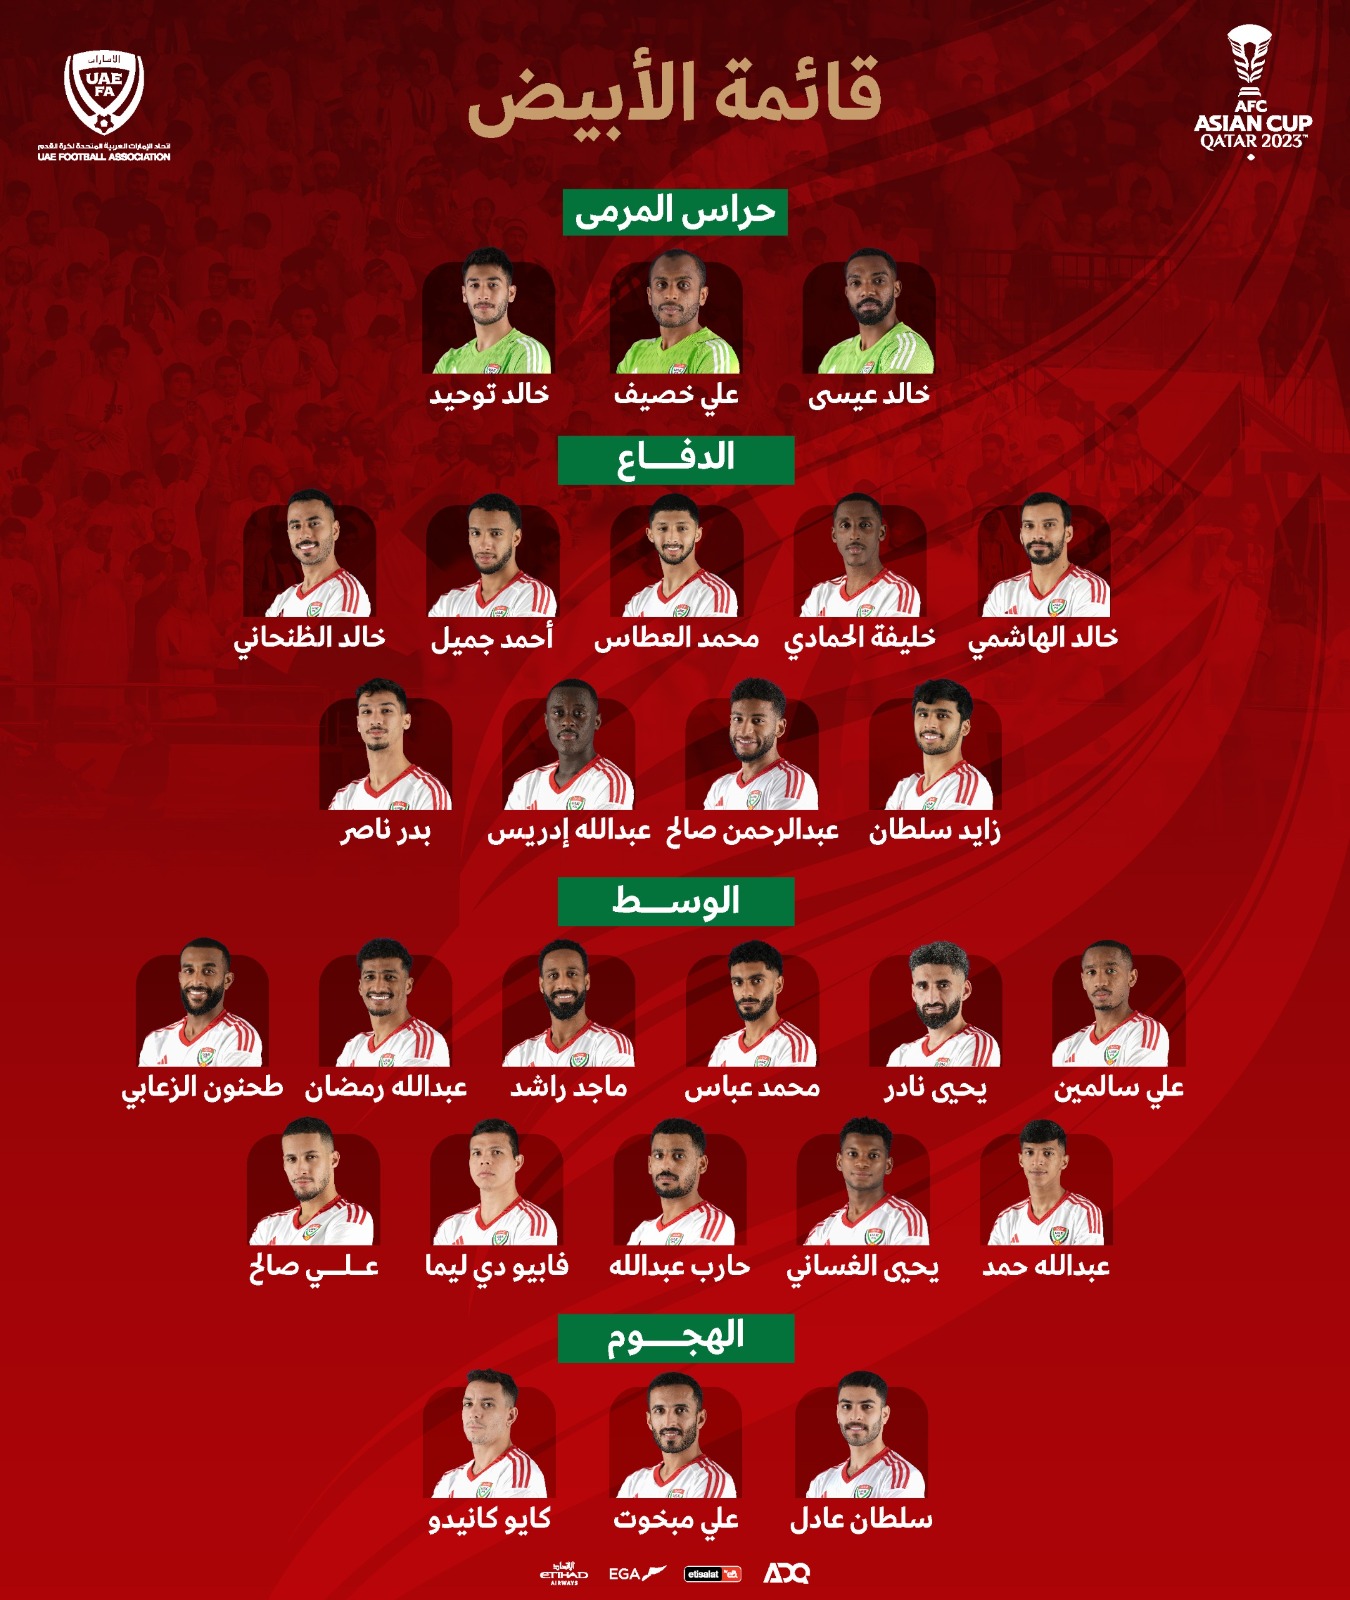 26 players in the UAE national team’s final roster for the Asian Cup